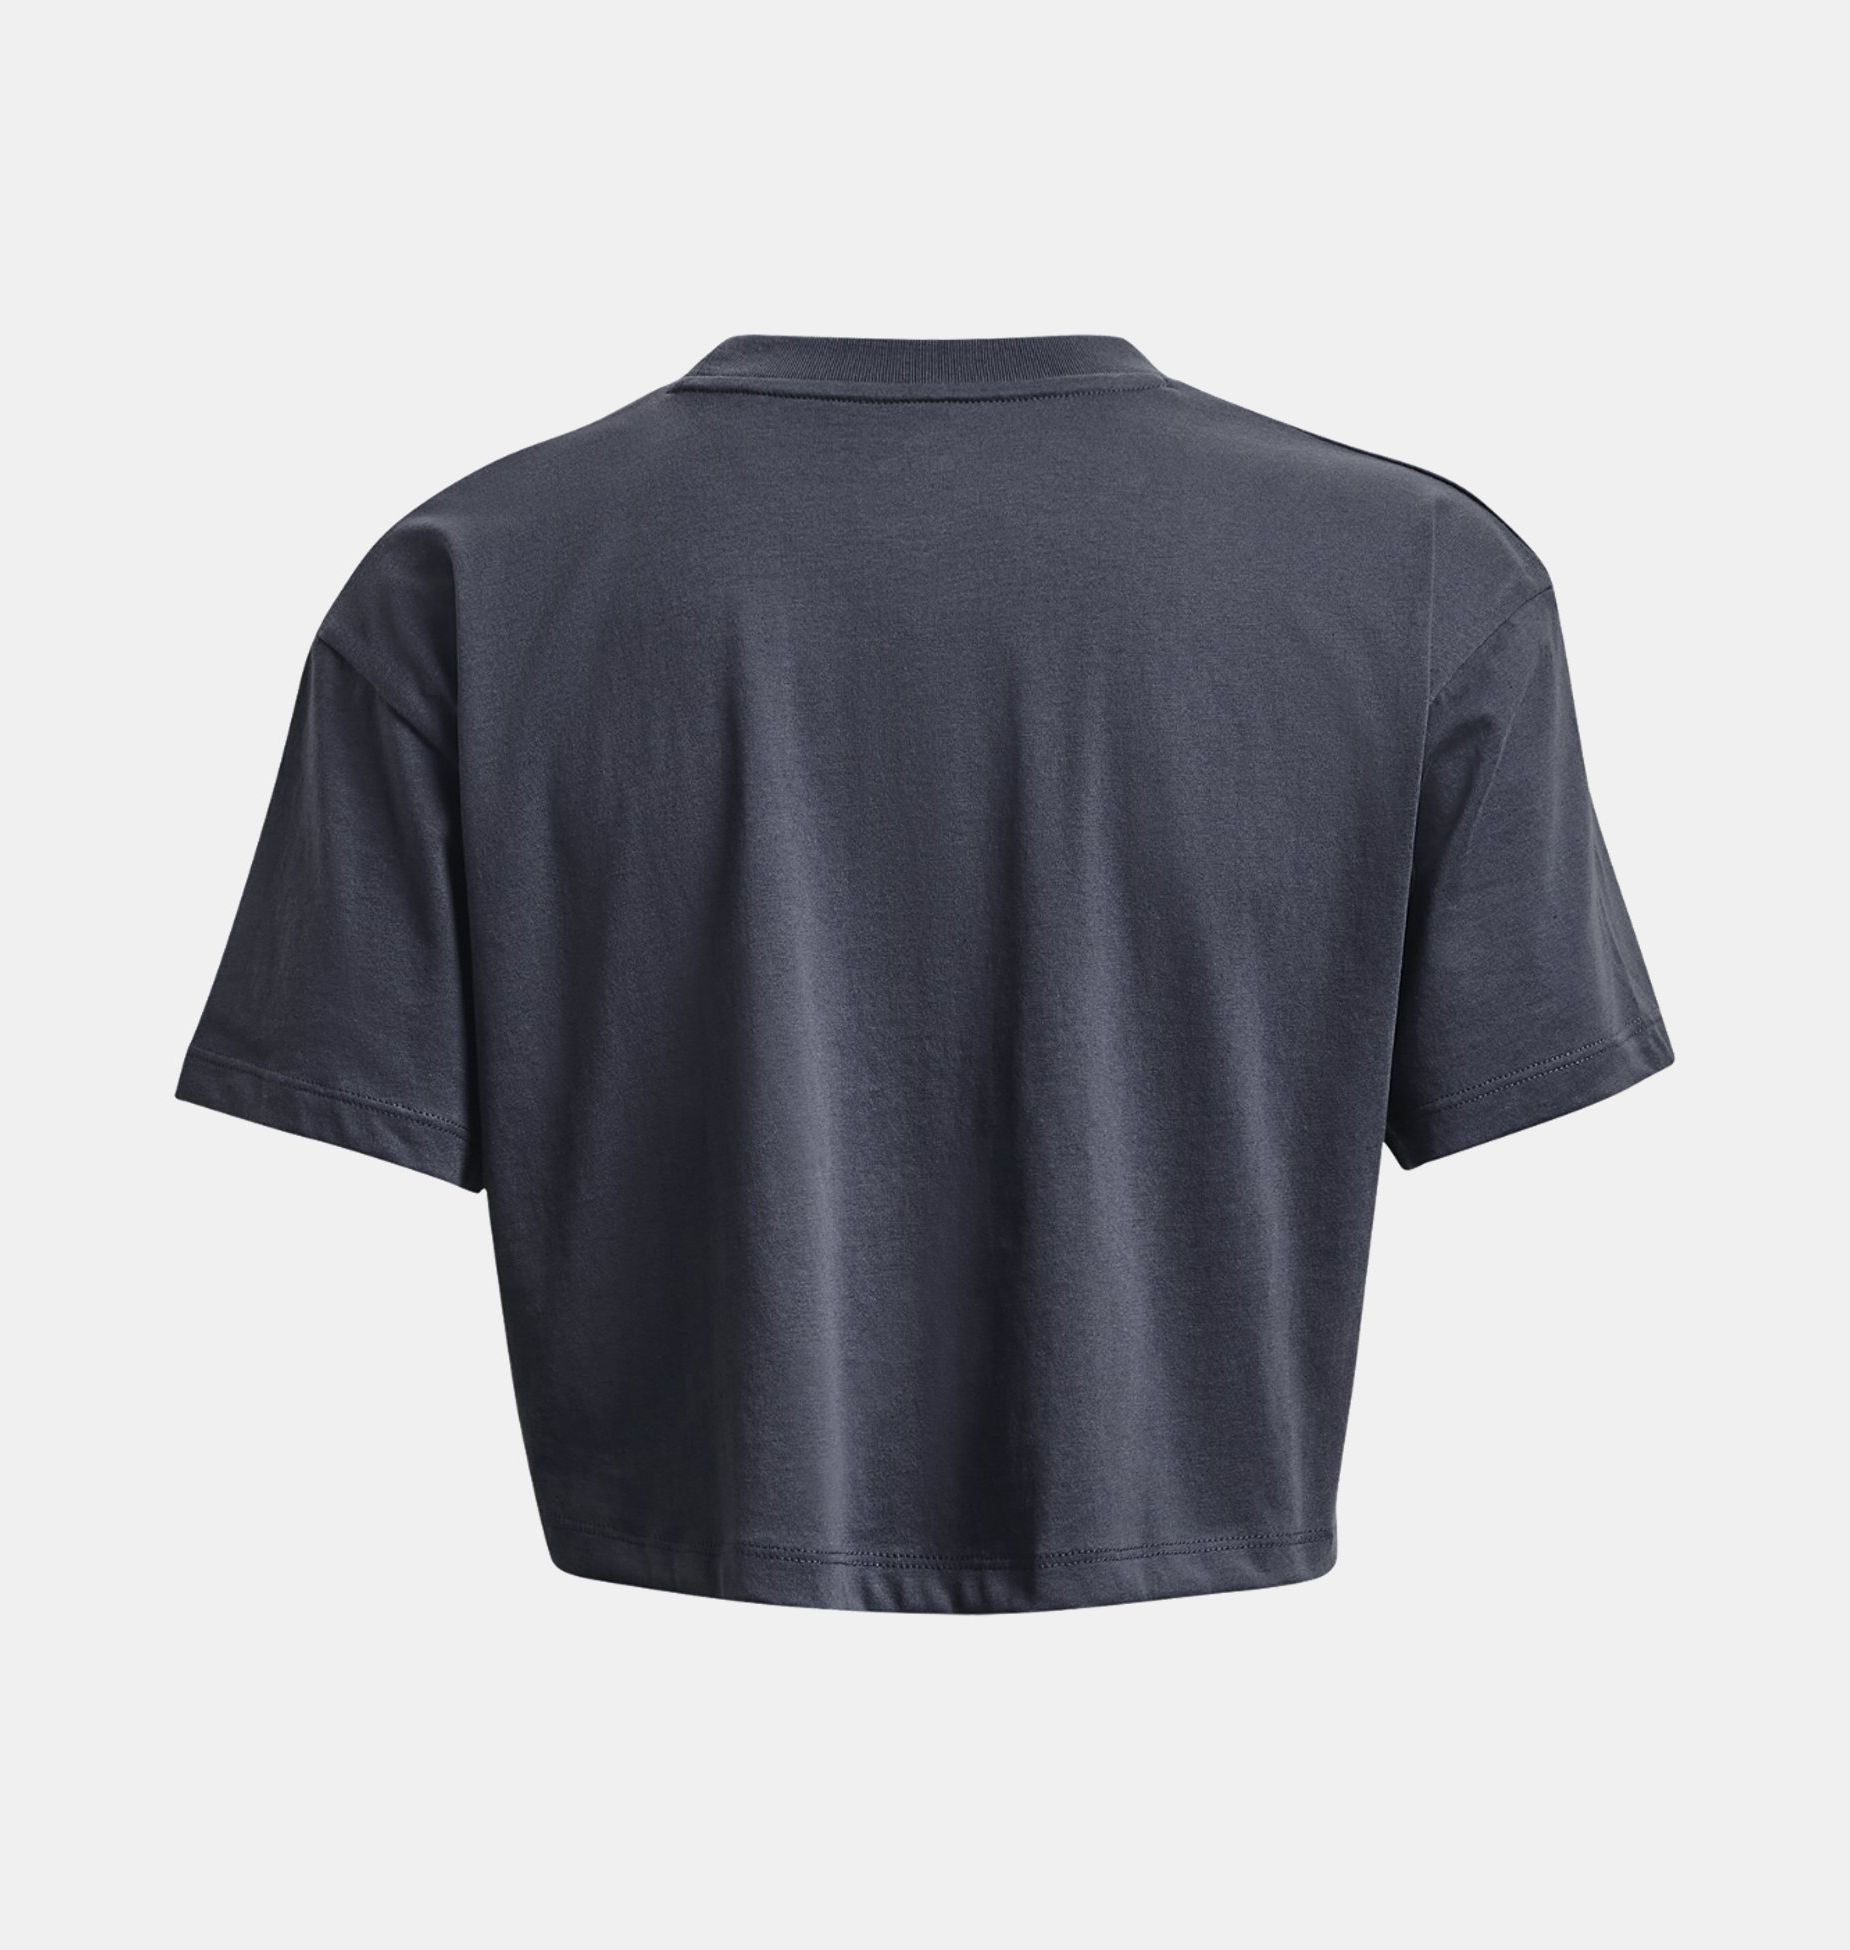 https://img2.sportconcept.com/backend_nou/content/images/fitness-under-armour%20tricou-branded-logo-crop-20230426163027.jpg